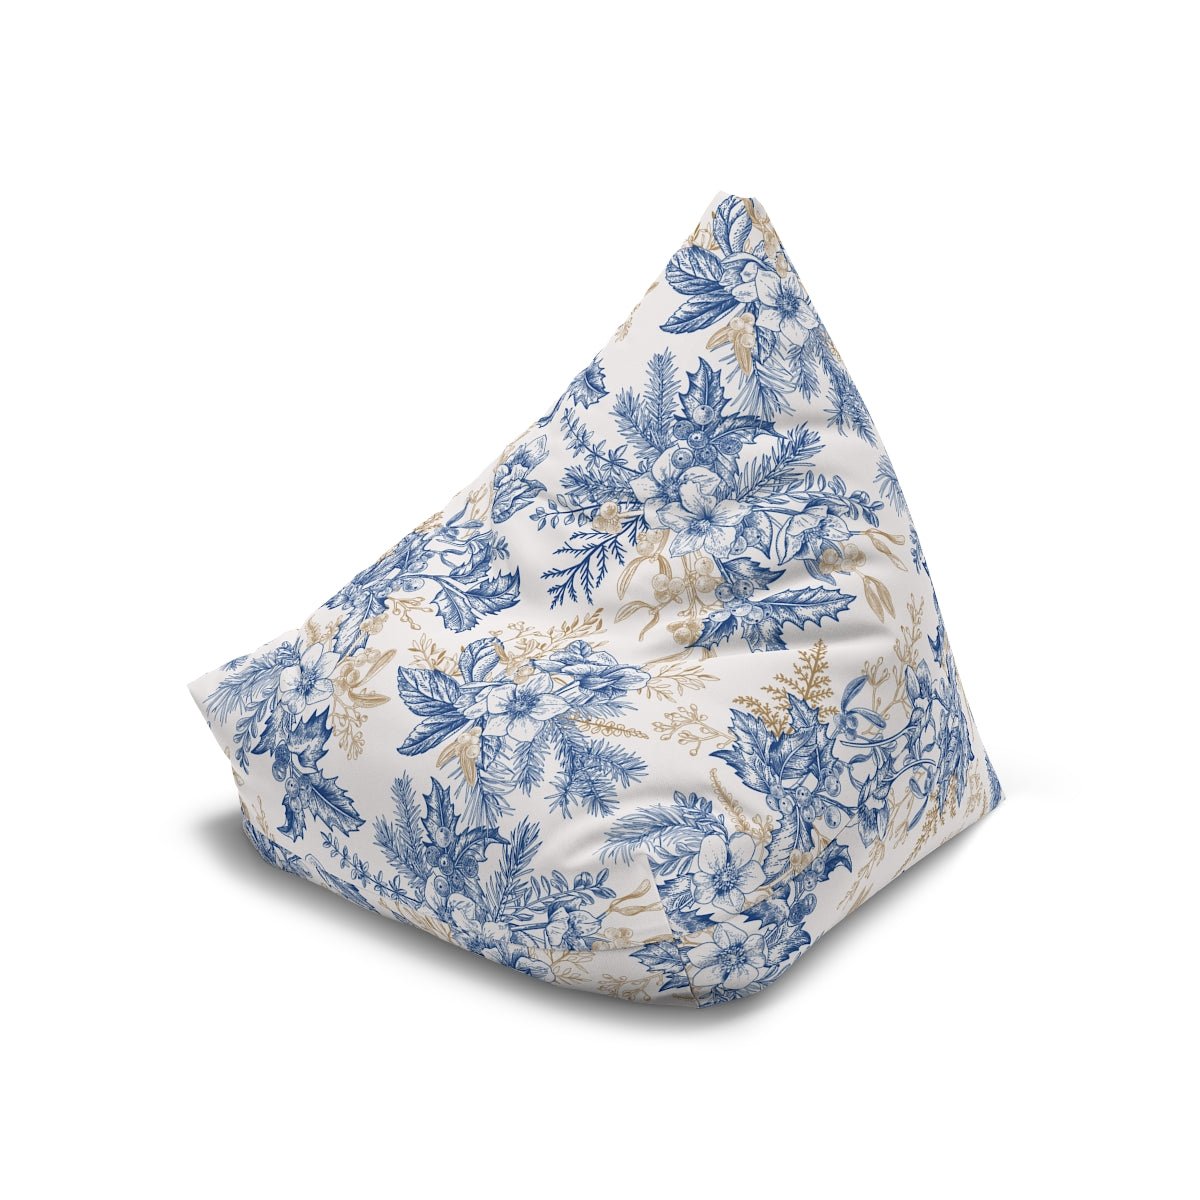 Winter Hellebore Flowers Bean Bag Chair Cover - Puffin Lime